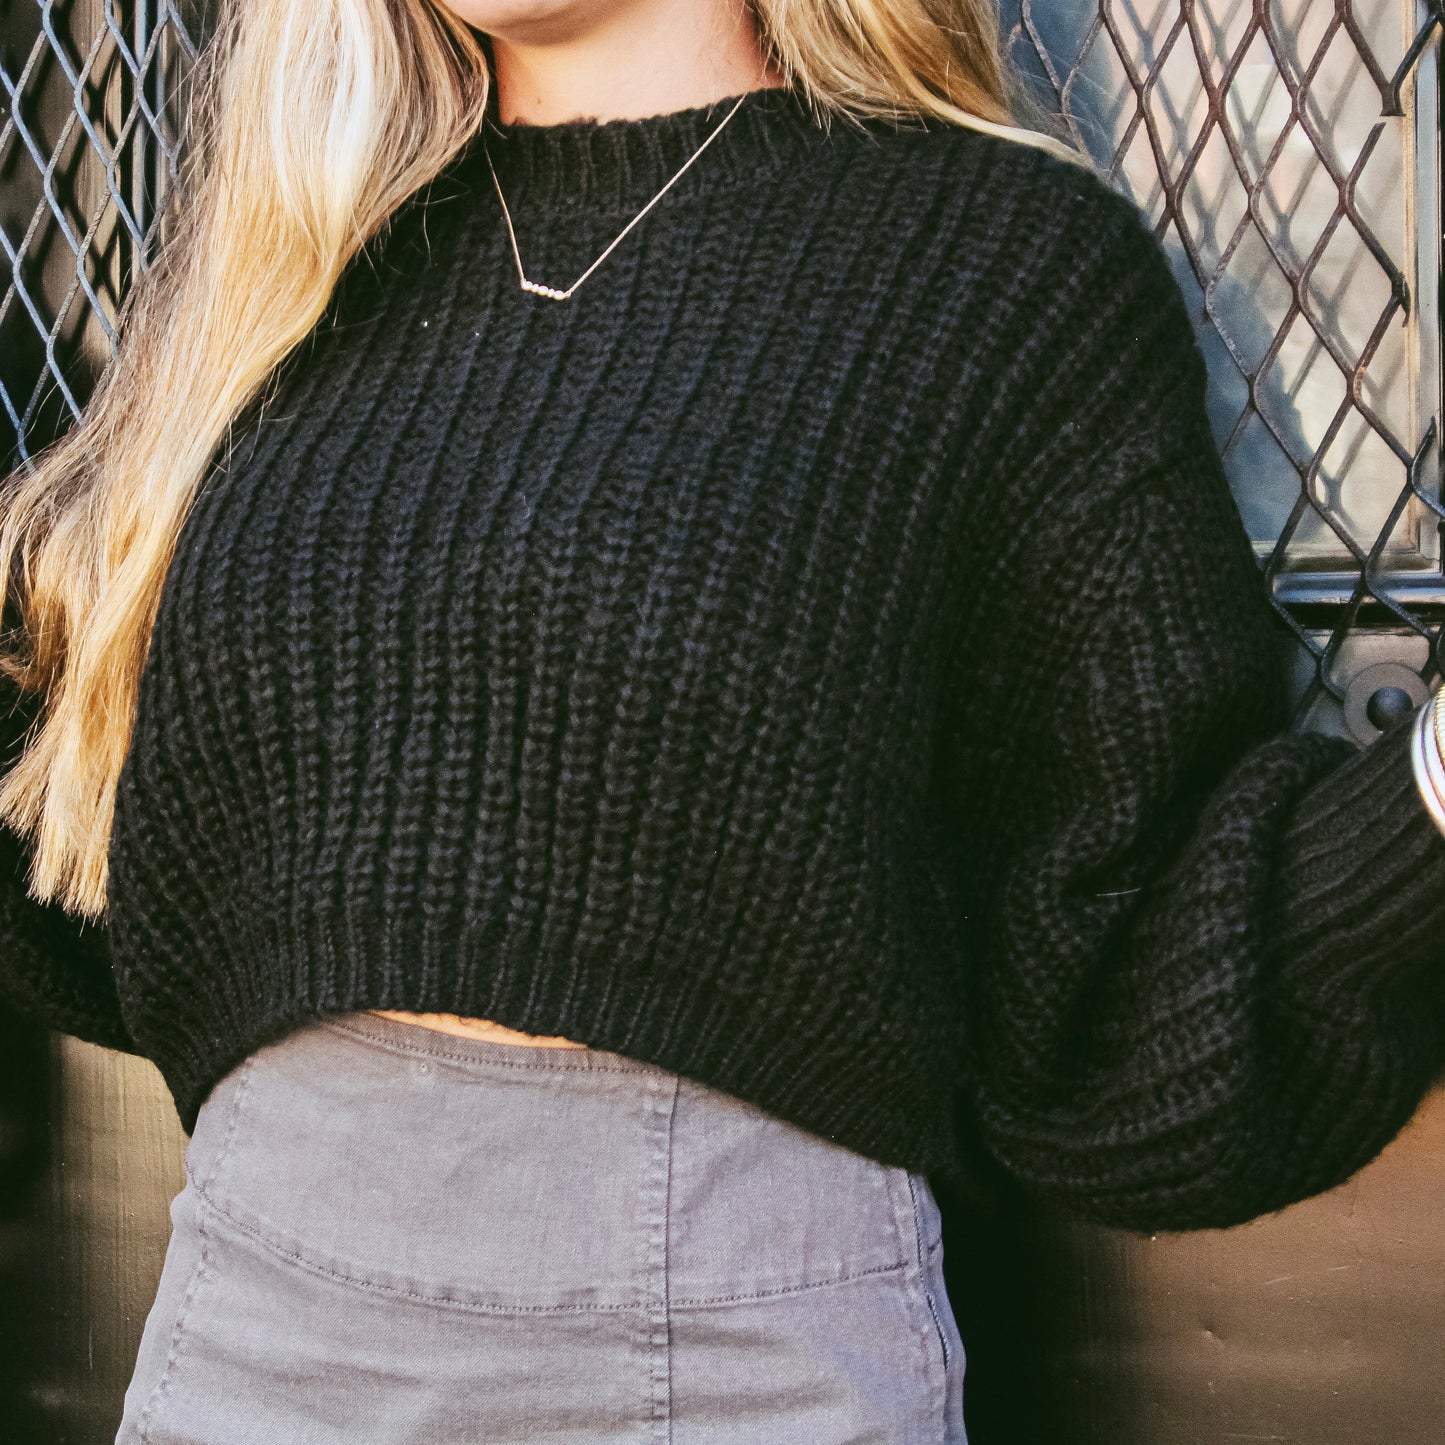 The Basic B Cropped Sweater